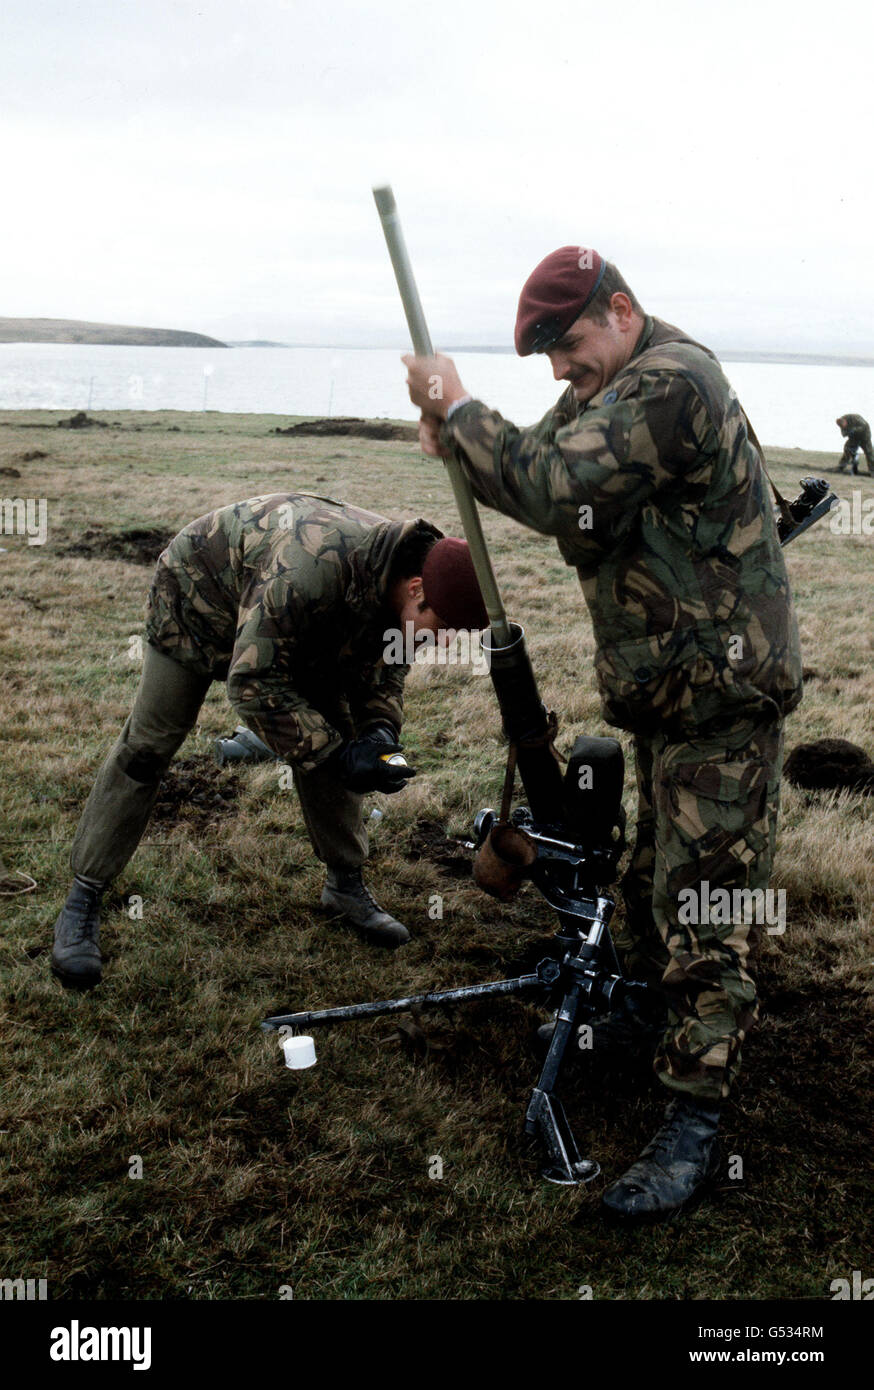 THE FALKLANDS WAR: Paratroopers of the British Falkland Islands Task Force clean out a mortar on East Falkland before the final push on Port Stanley, the capital, and the surrender of the Argentine armed forces on June 15th 1982. *25/03/02 Paratroopers of the British Falkland Islands Task Force cleaning out a mortar on East Falkland before the final push on Port Stanley, the capital, and the surrender of the Argentine armed forces on June 15th 1982. The 20th anniversary of the invasion of the Falklands by Argentine forces will be on April 2nd, 2002. Stock Photo